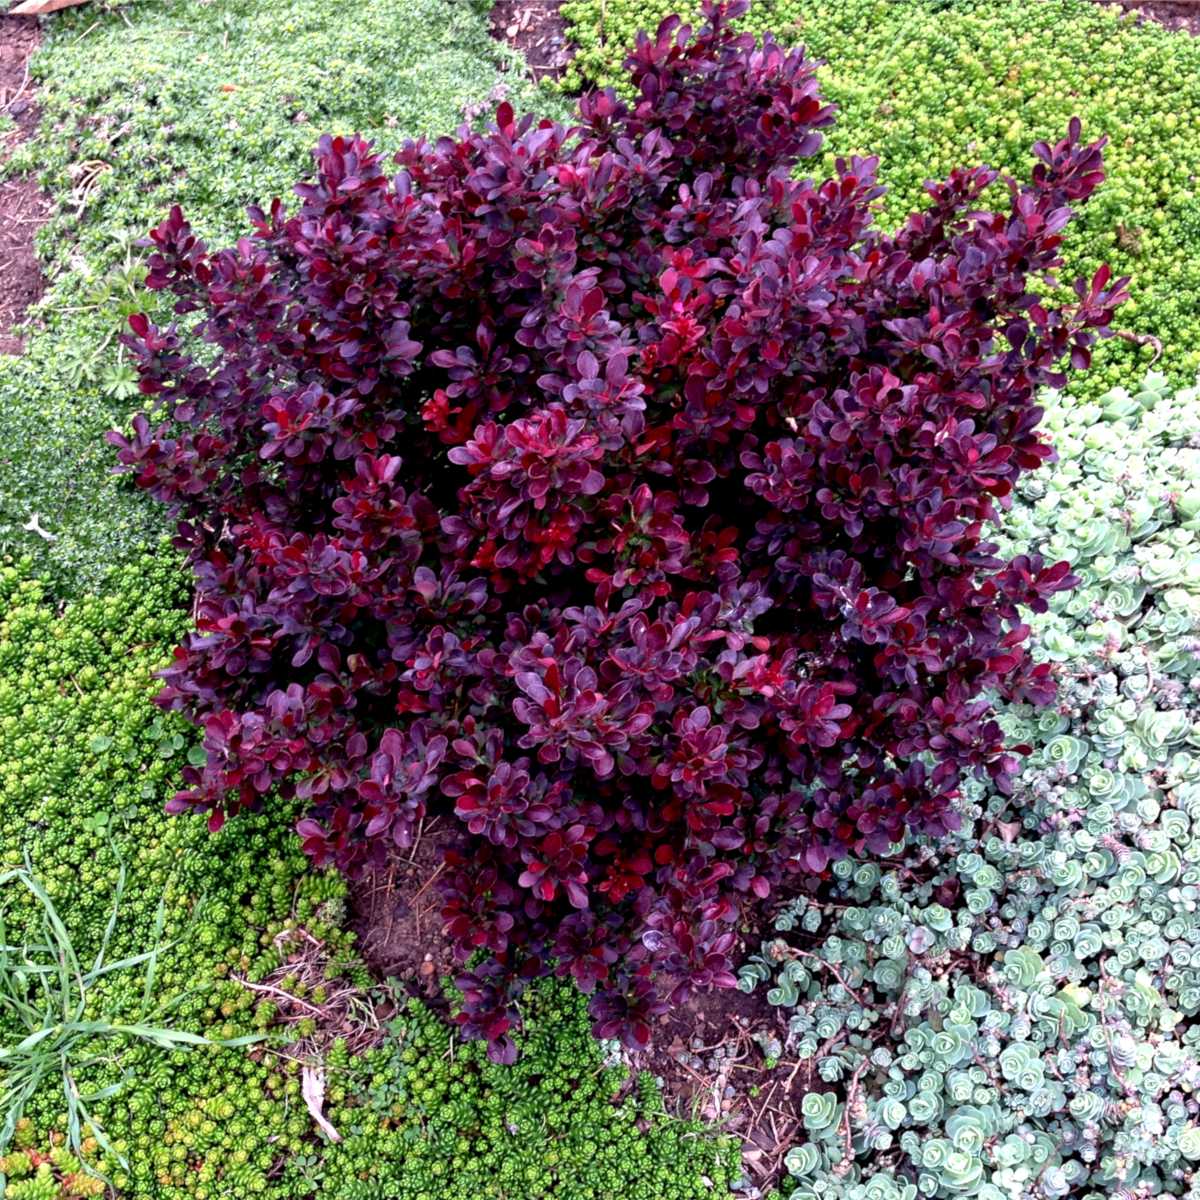 Dwarf barberry varieties, ideal for low hedges or even indoor plants